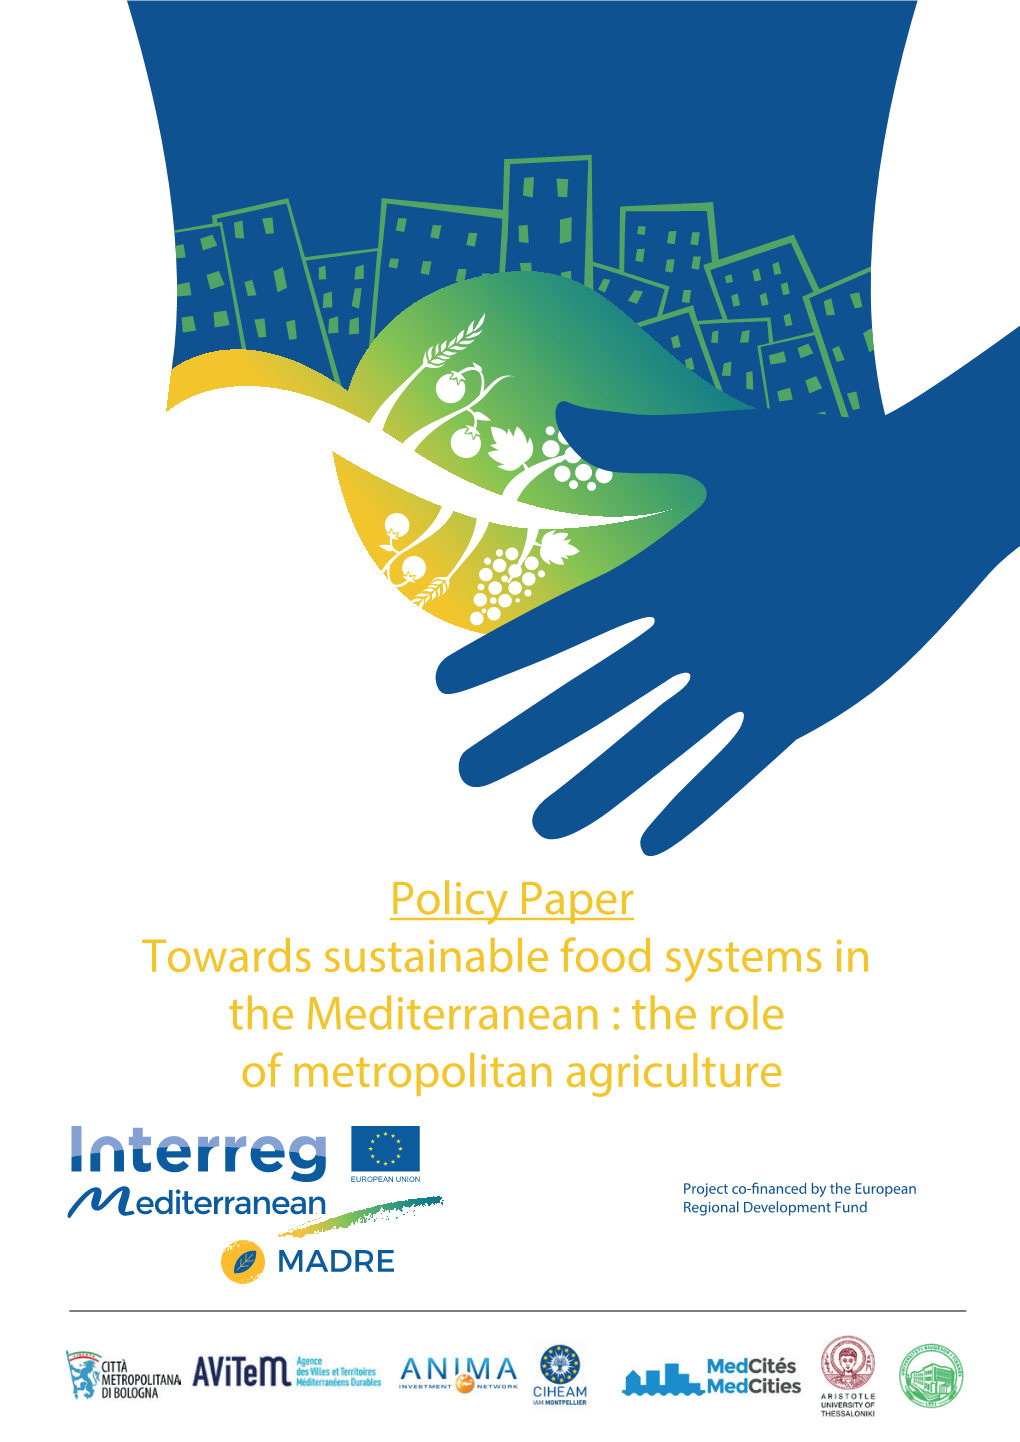 Policy Paper Towards Sustainable Food Systems in the Mediterranean : the Role of Metropolitan Agriculture